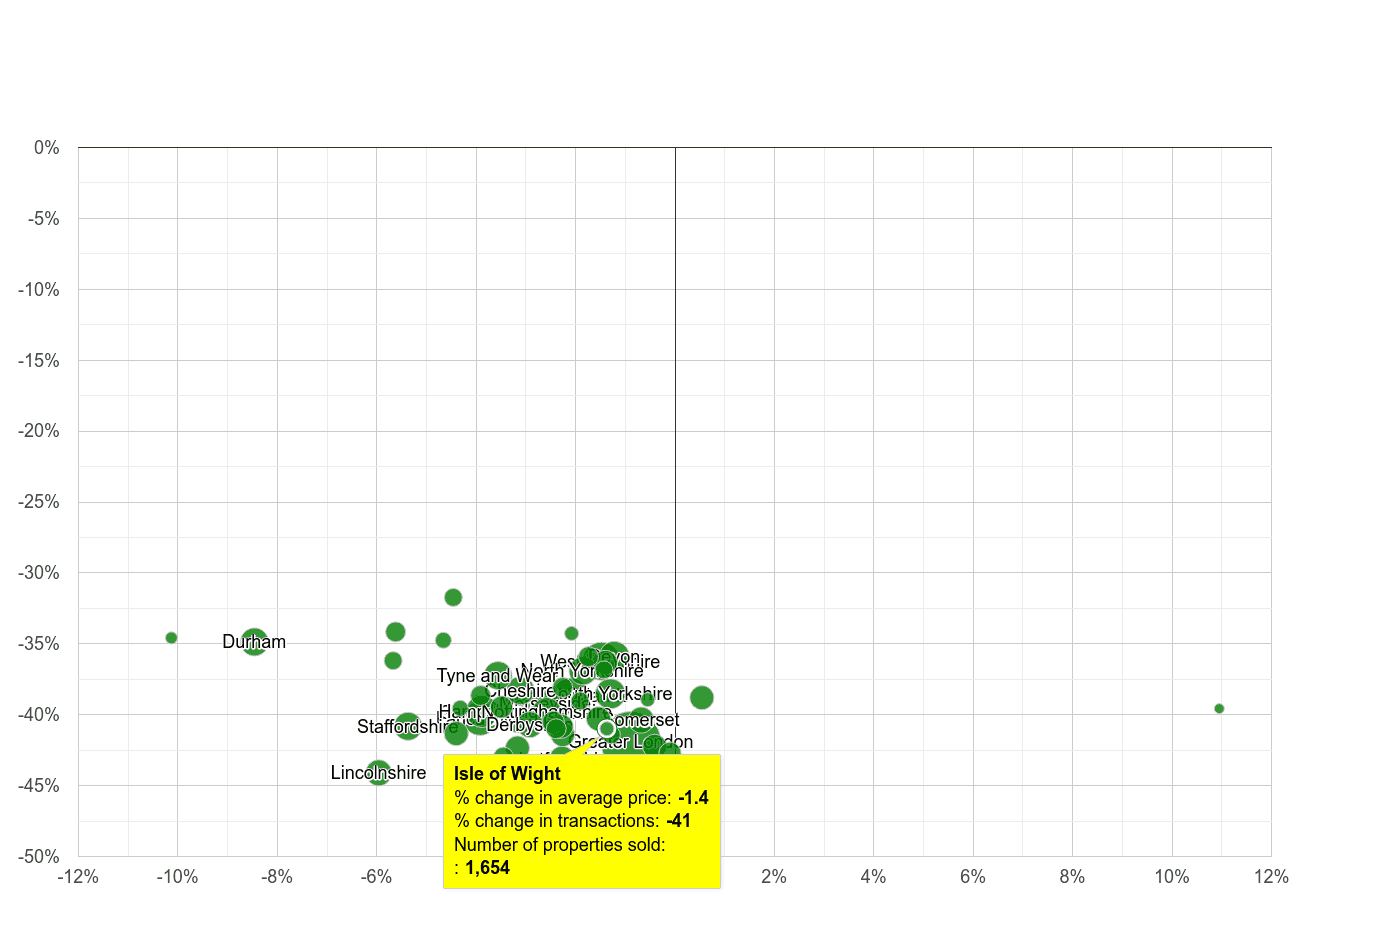 Isle of Wight property price and sales volume change relative to other counties